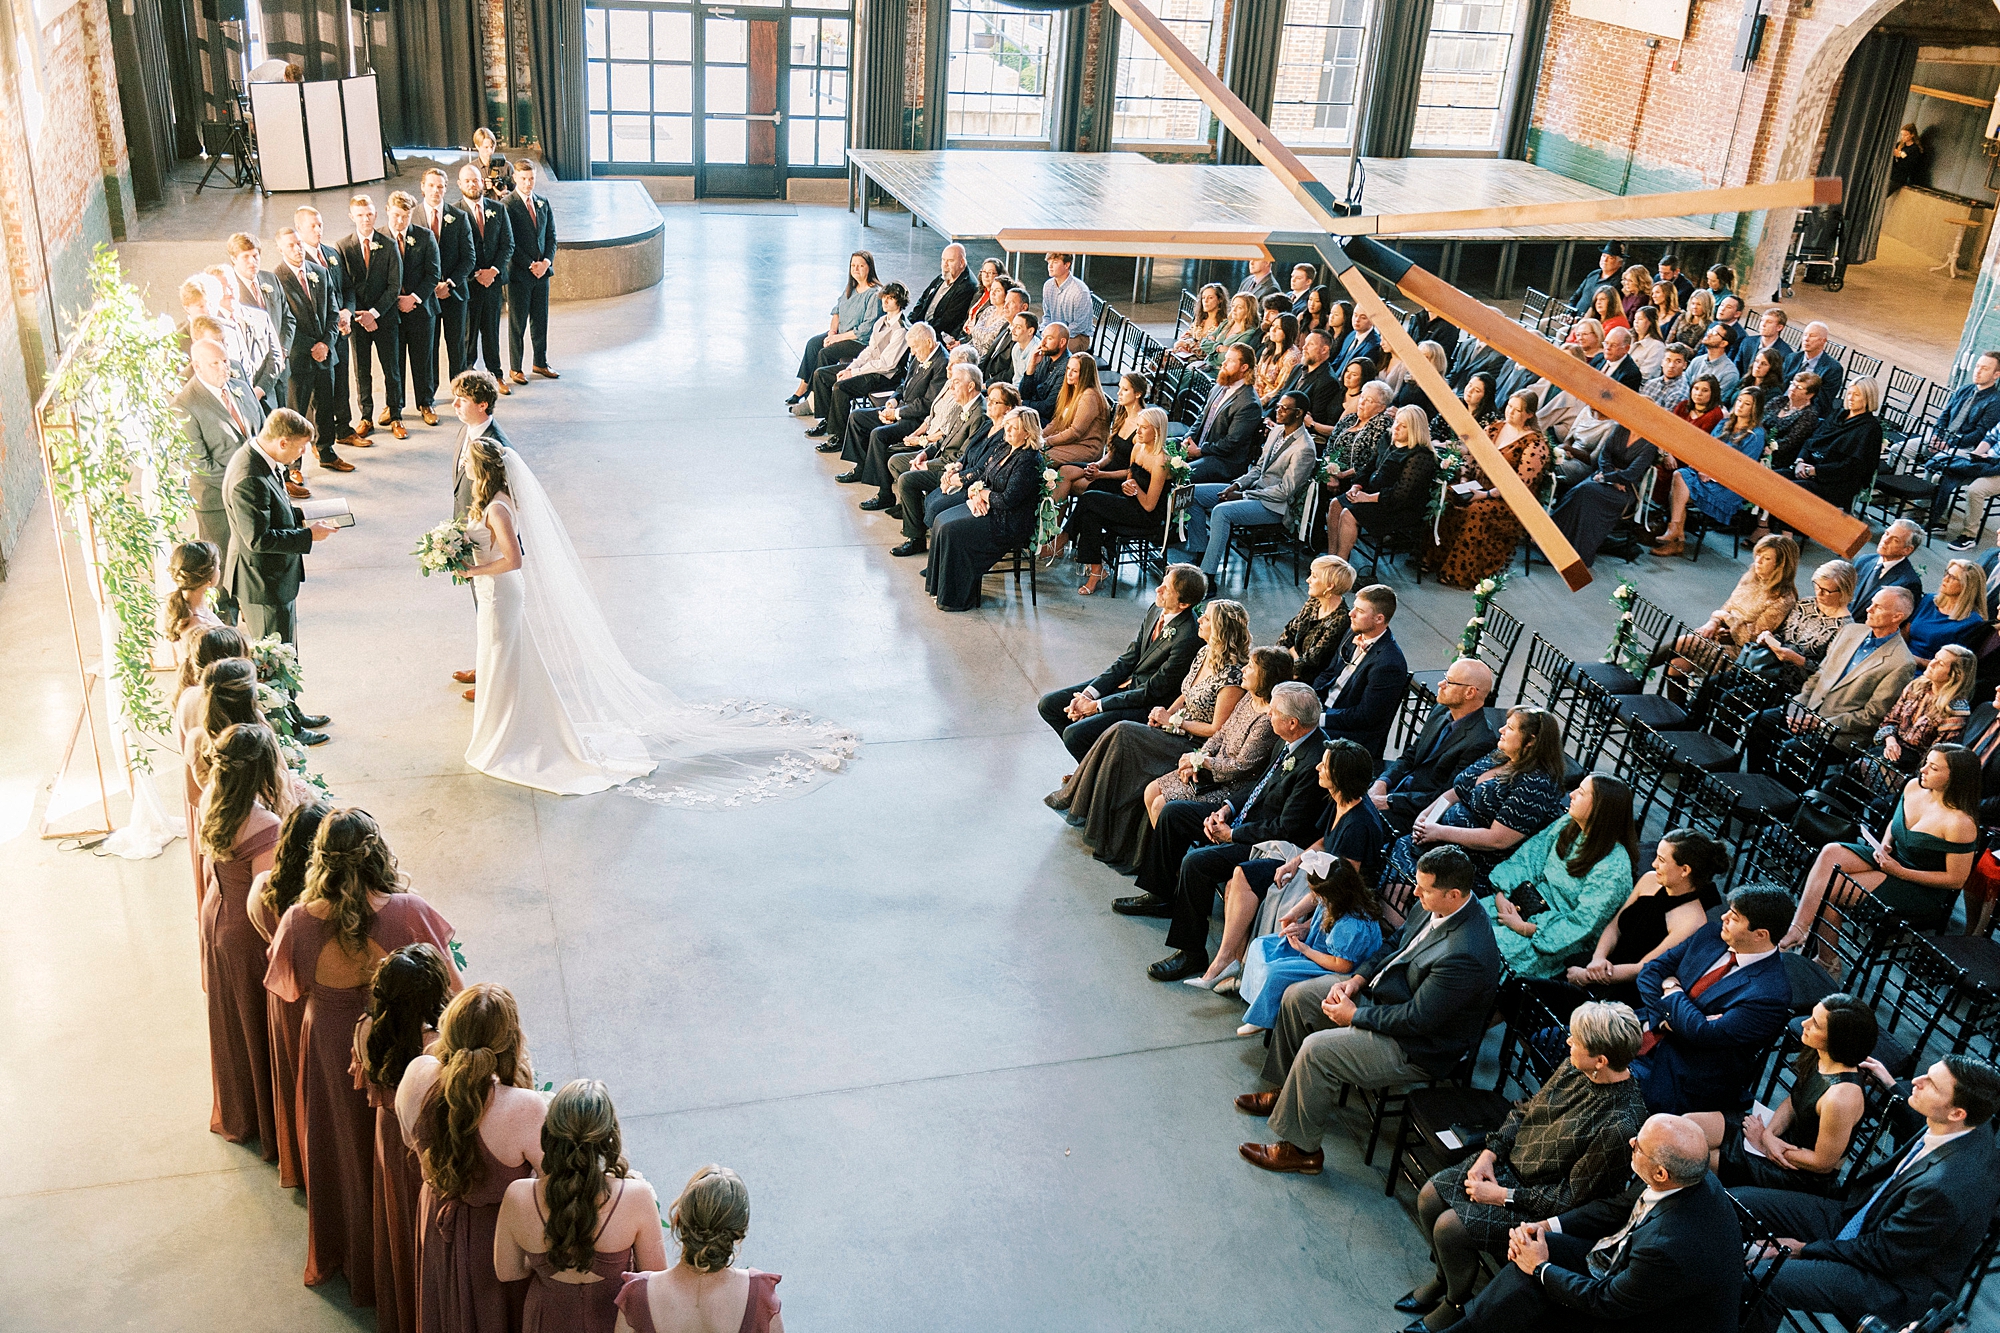 Christ-centered wedding ceremony at the Cadillac Service Garage in Greensboro NC